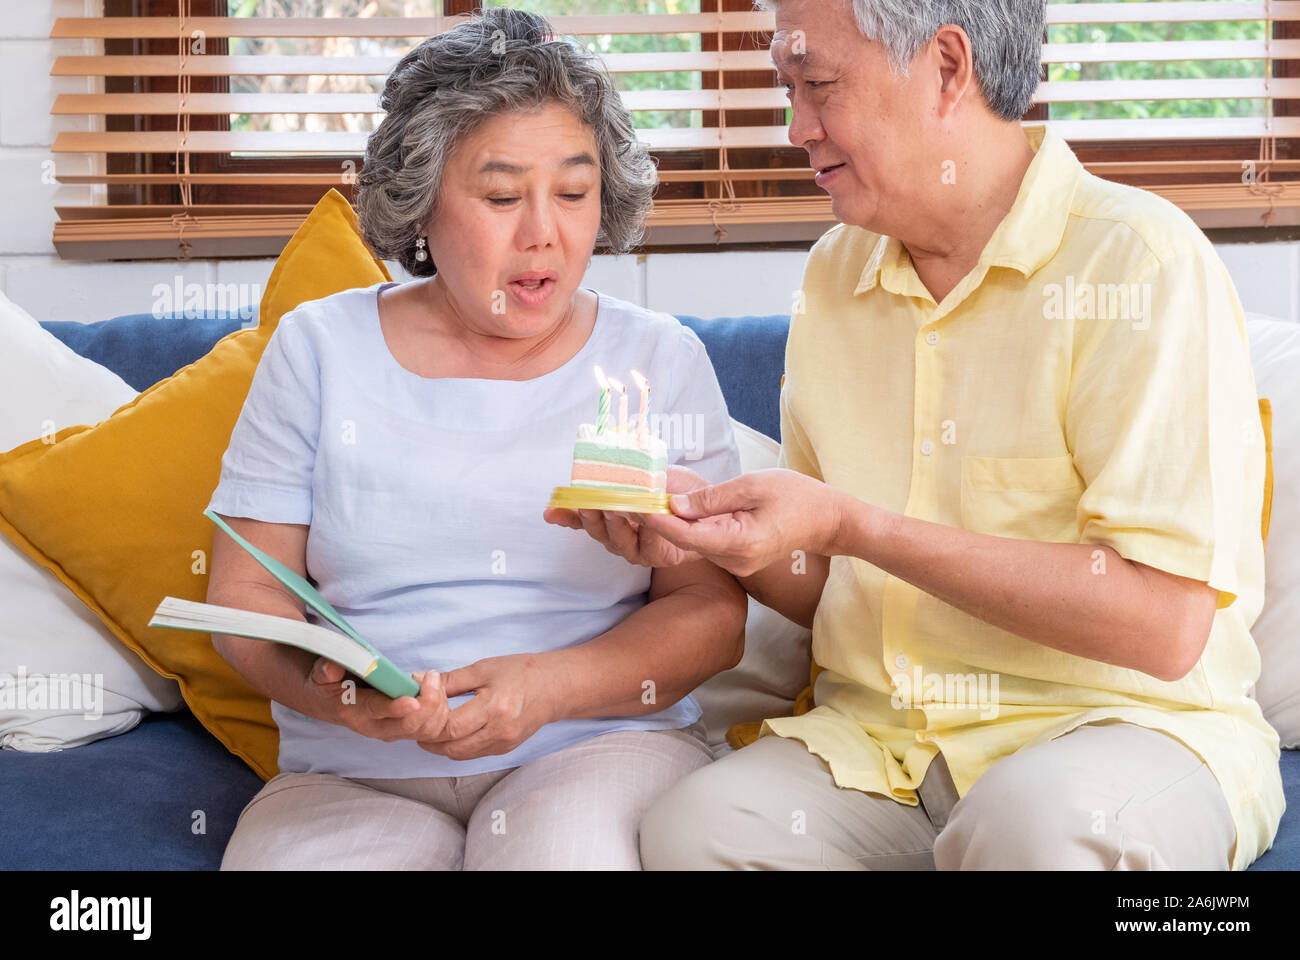 asian senior man surprise senior woman with birthday cake in living room at home.aging at home concept. Stock Photo